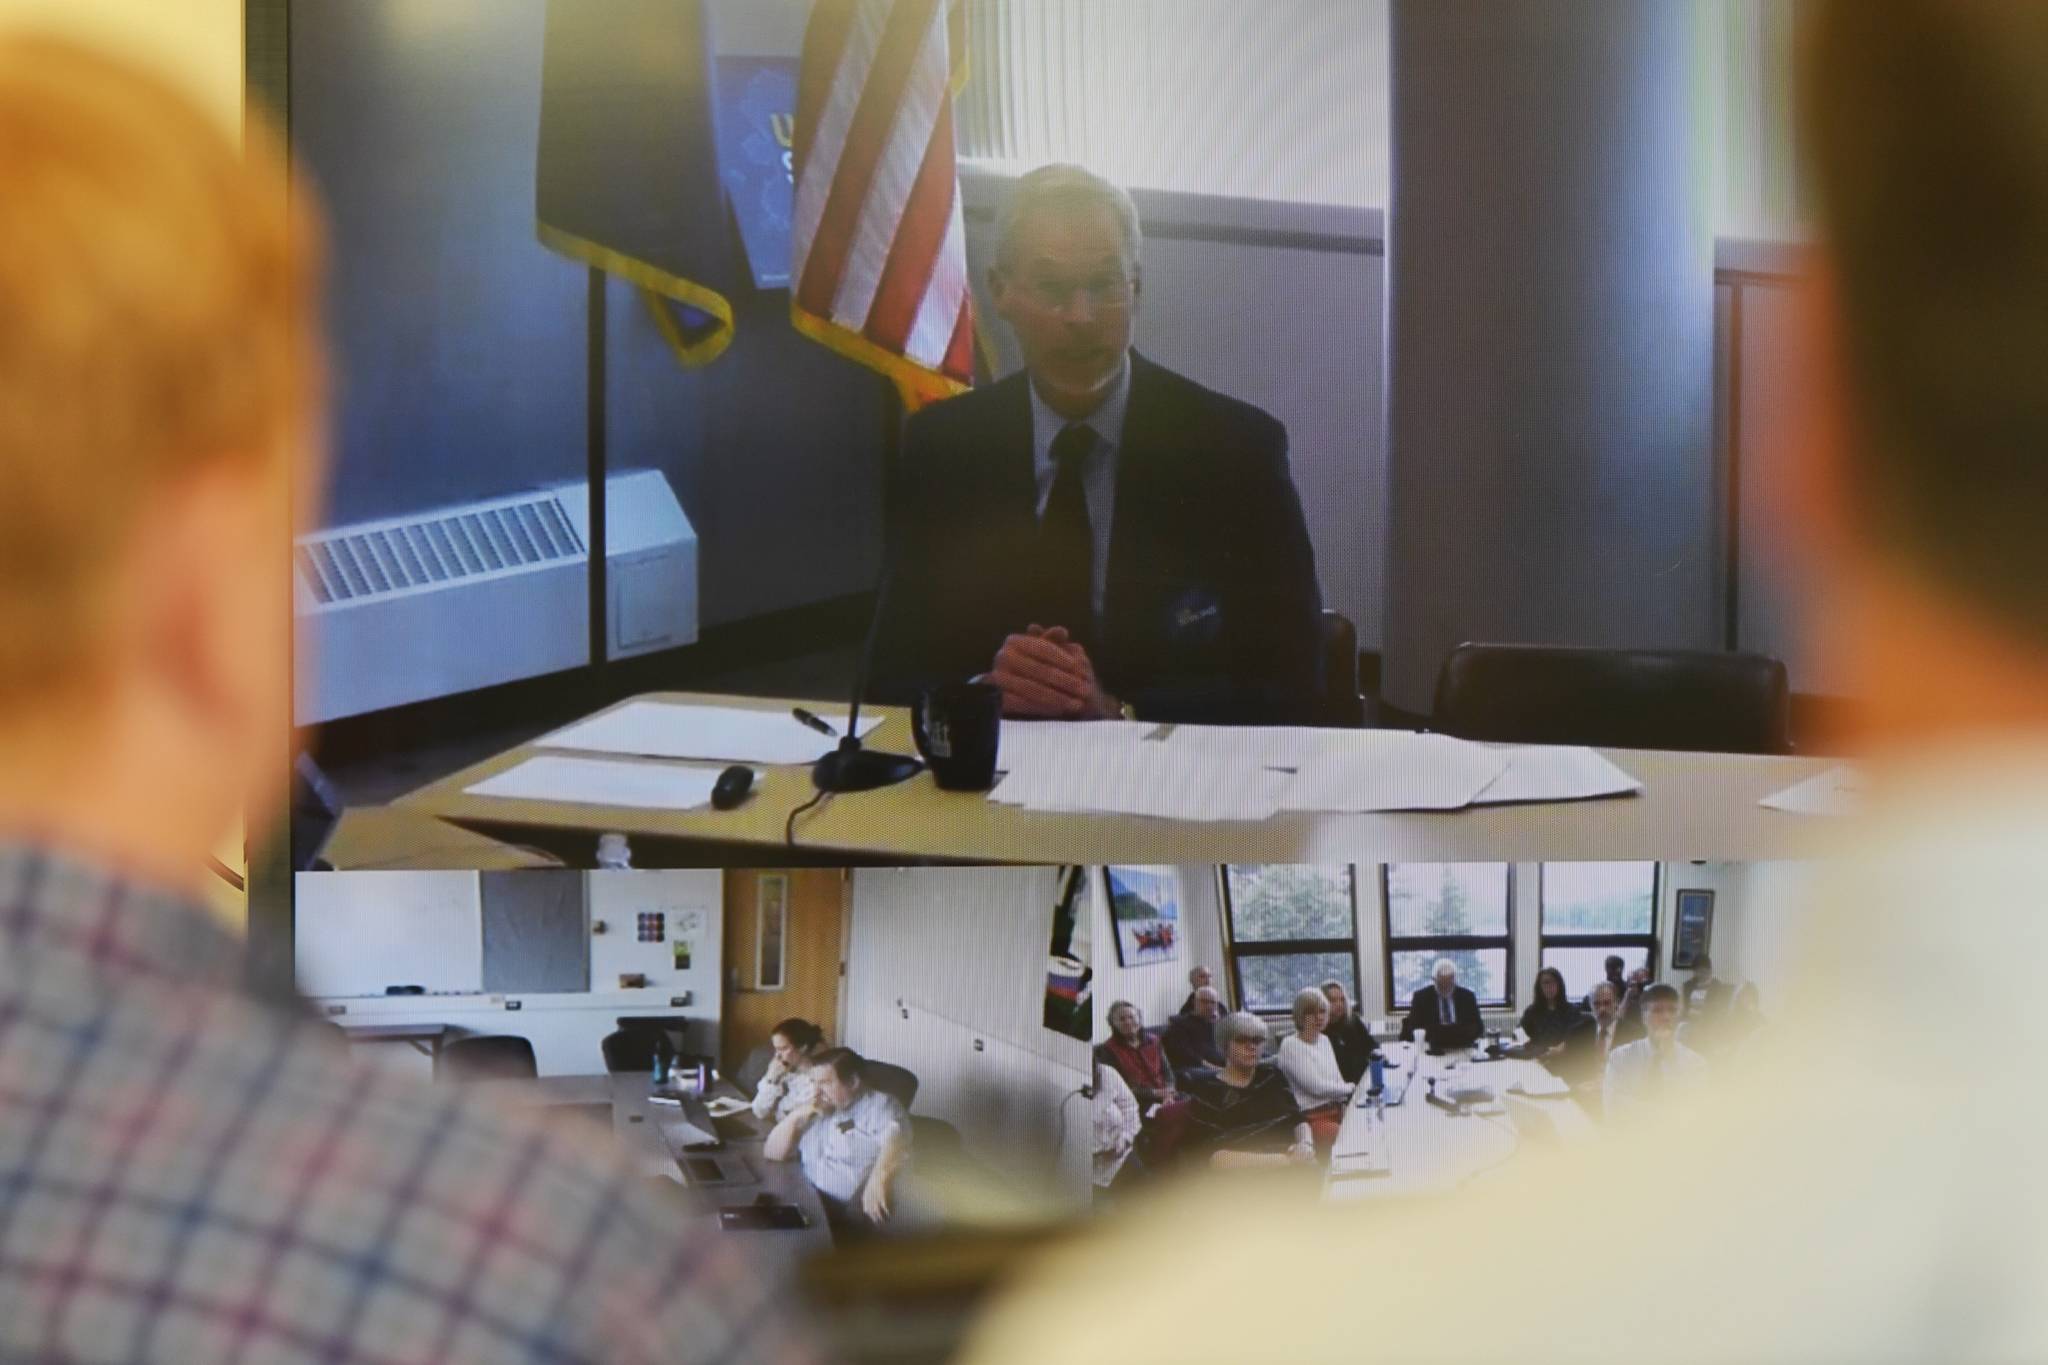 University of Alaska Southeast administrators and staff watch University President Jim Johnsen during an online meeting being held at UA campuses around the state on Gov. Mike Dunleavy’s budget cuts on Monday, July 15, 2019. (Michael Penn | Juneau Empire)